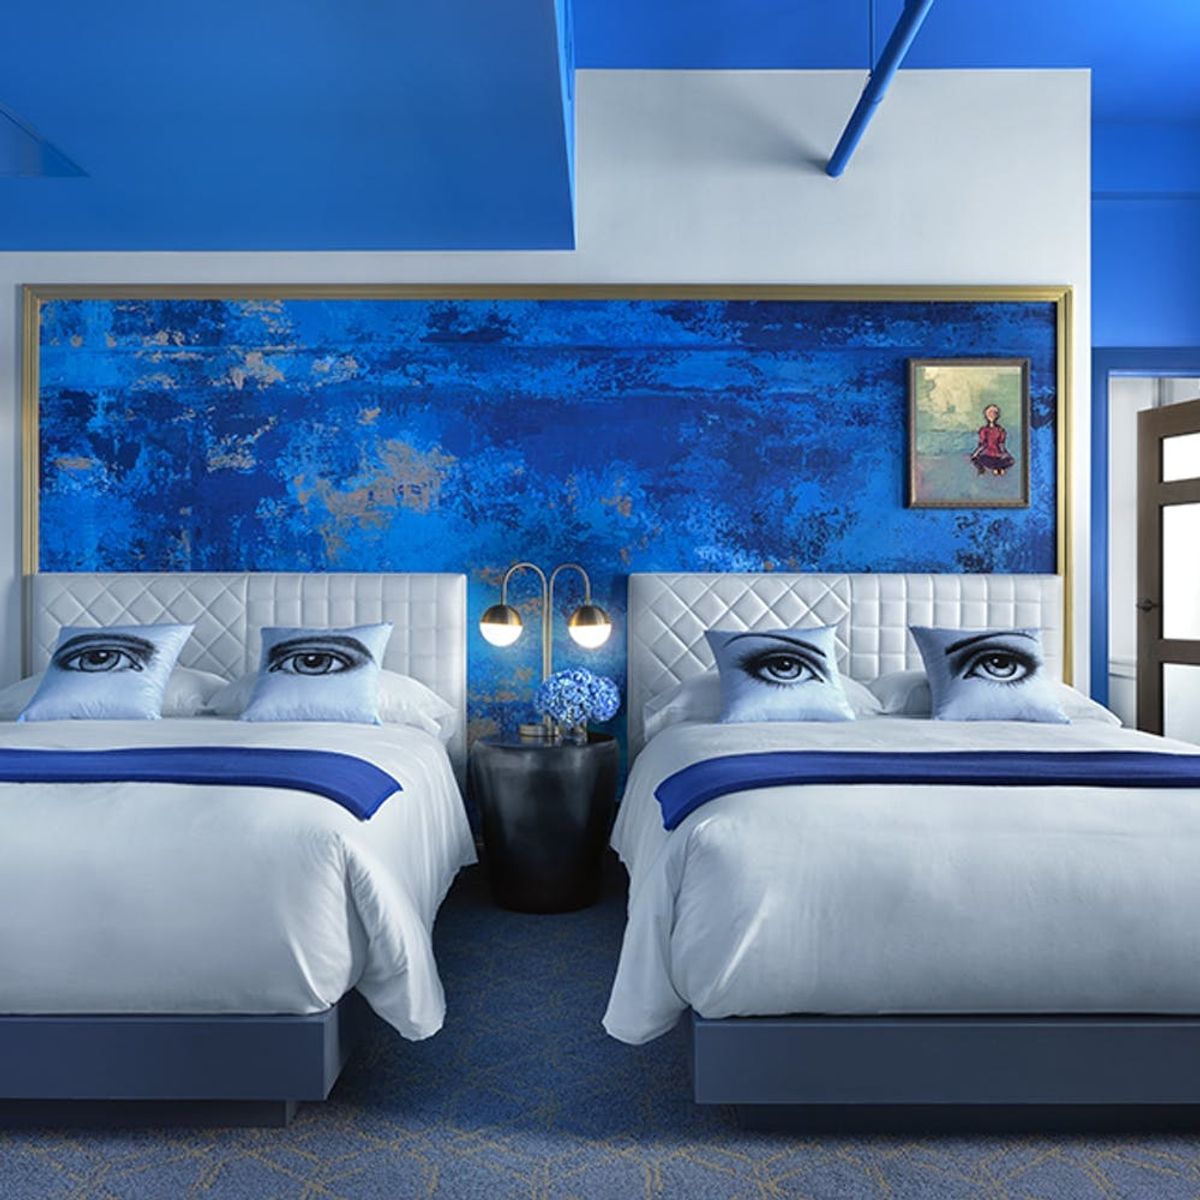 This Colorful New Hotel Lets You Book Your Room Based on Your Mood